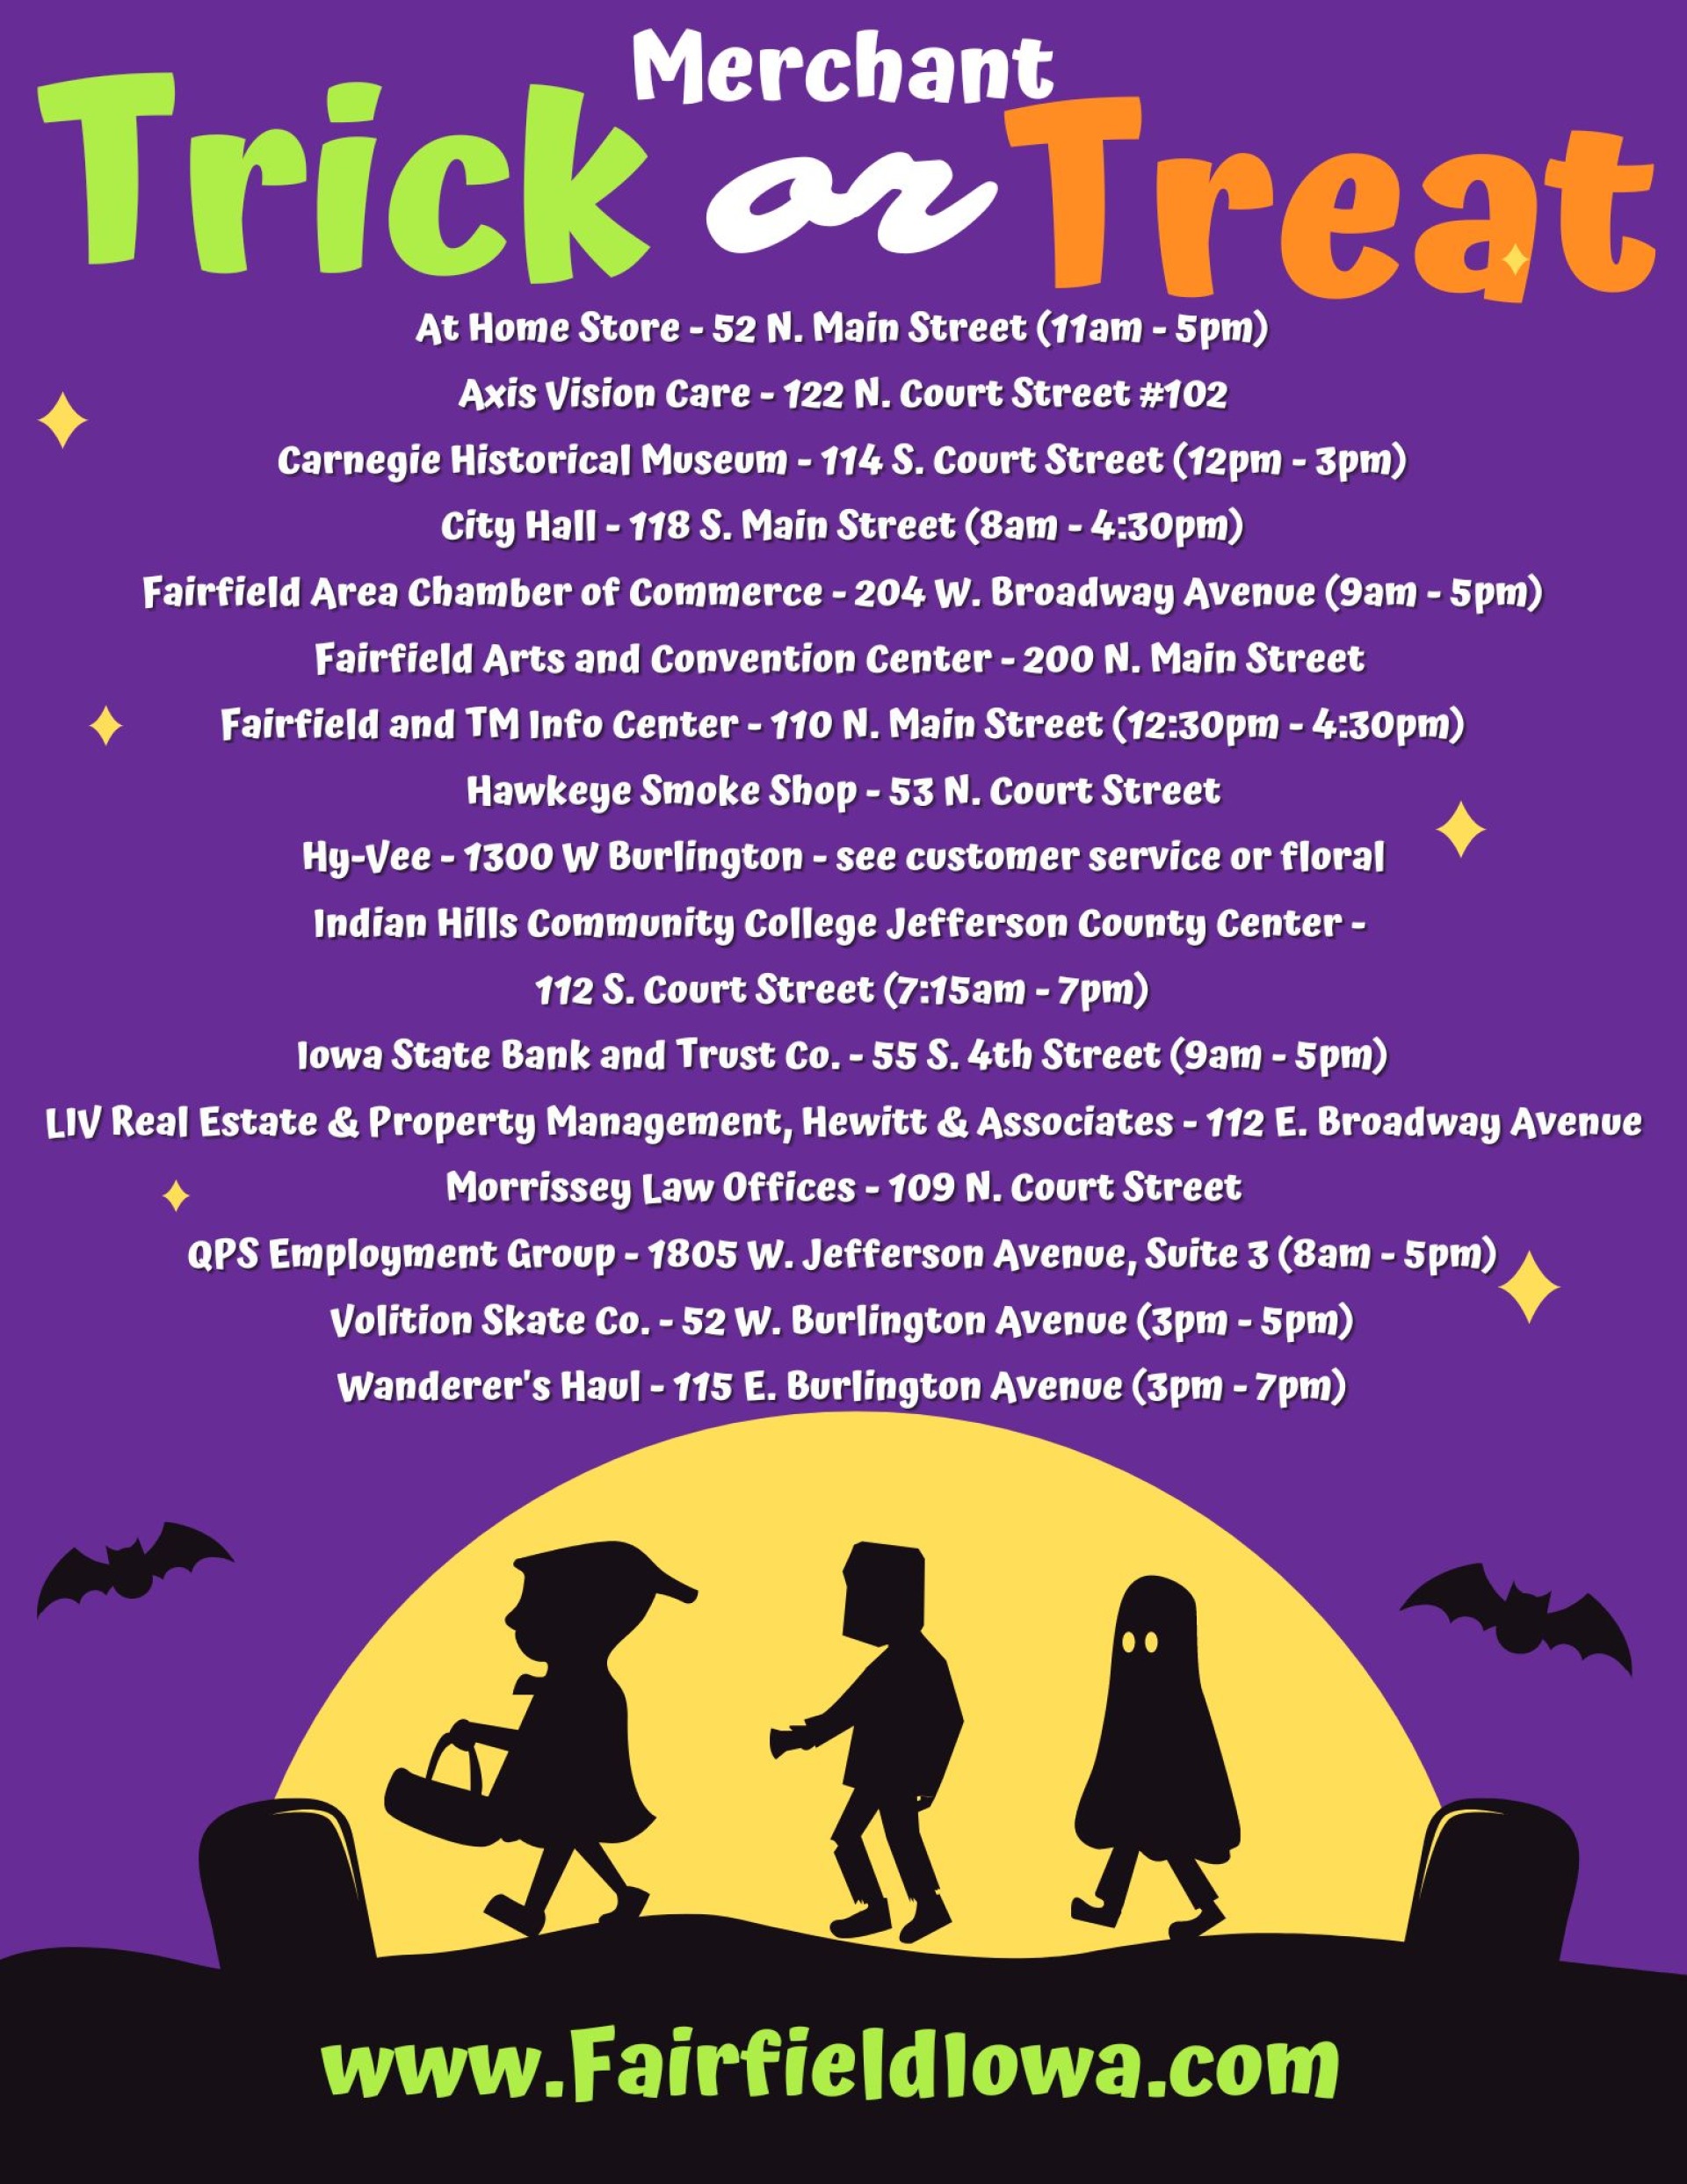 Chamber Merchant Trick or Treat Fairfield Area Chamber of Commerce